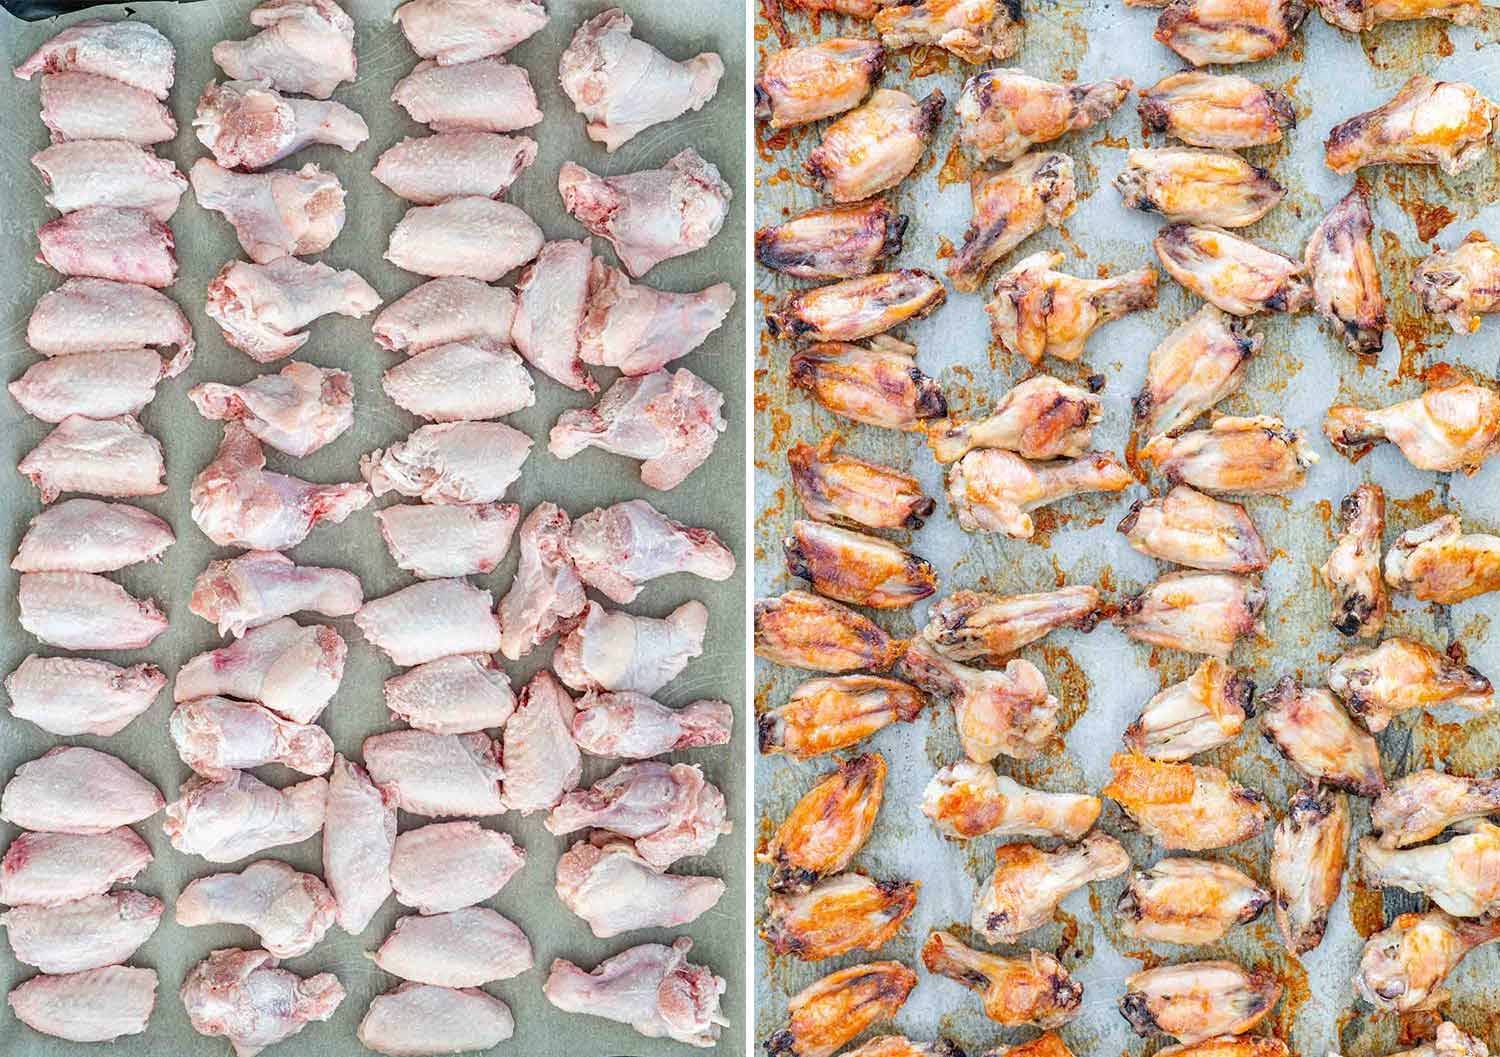 process shots showing how to make lemon pepper wings.